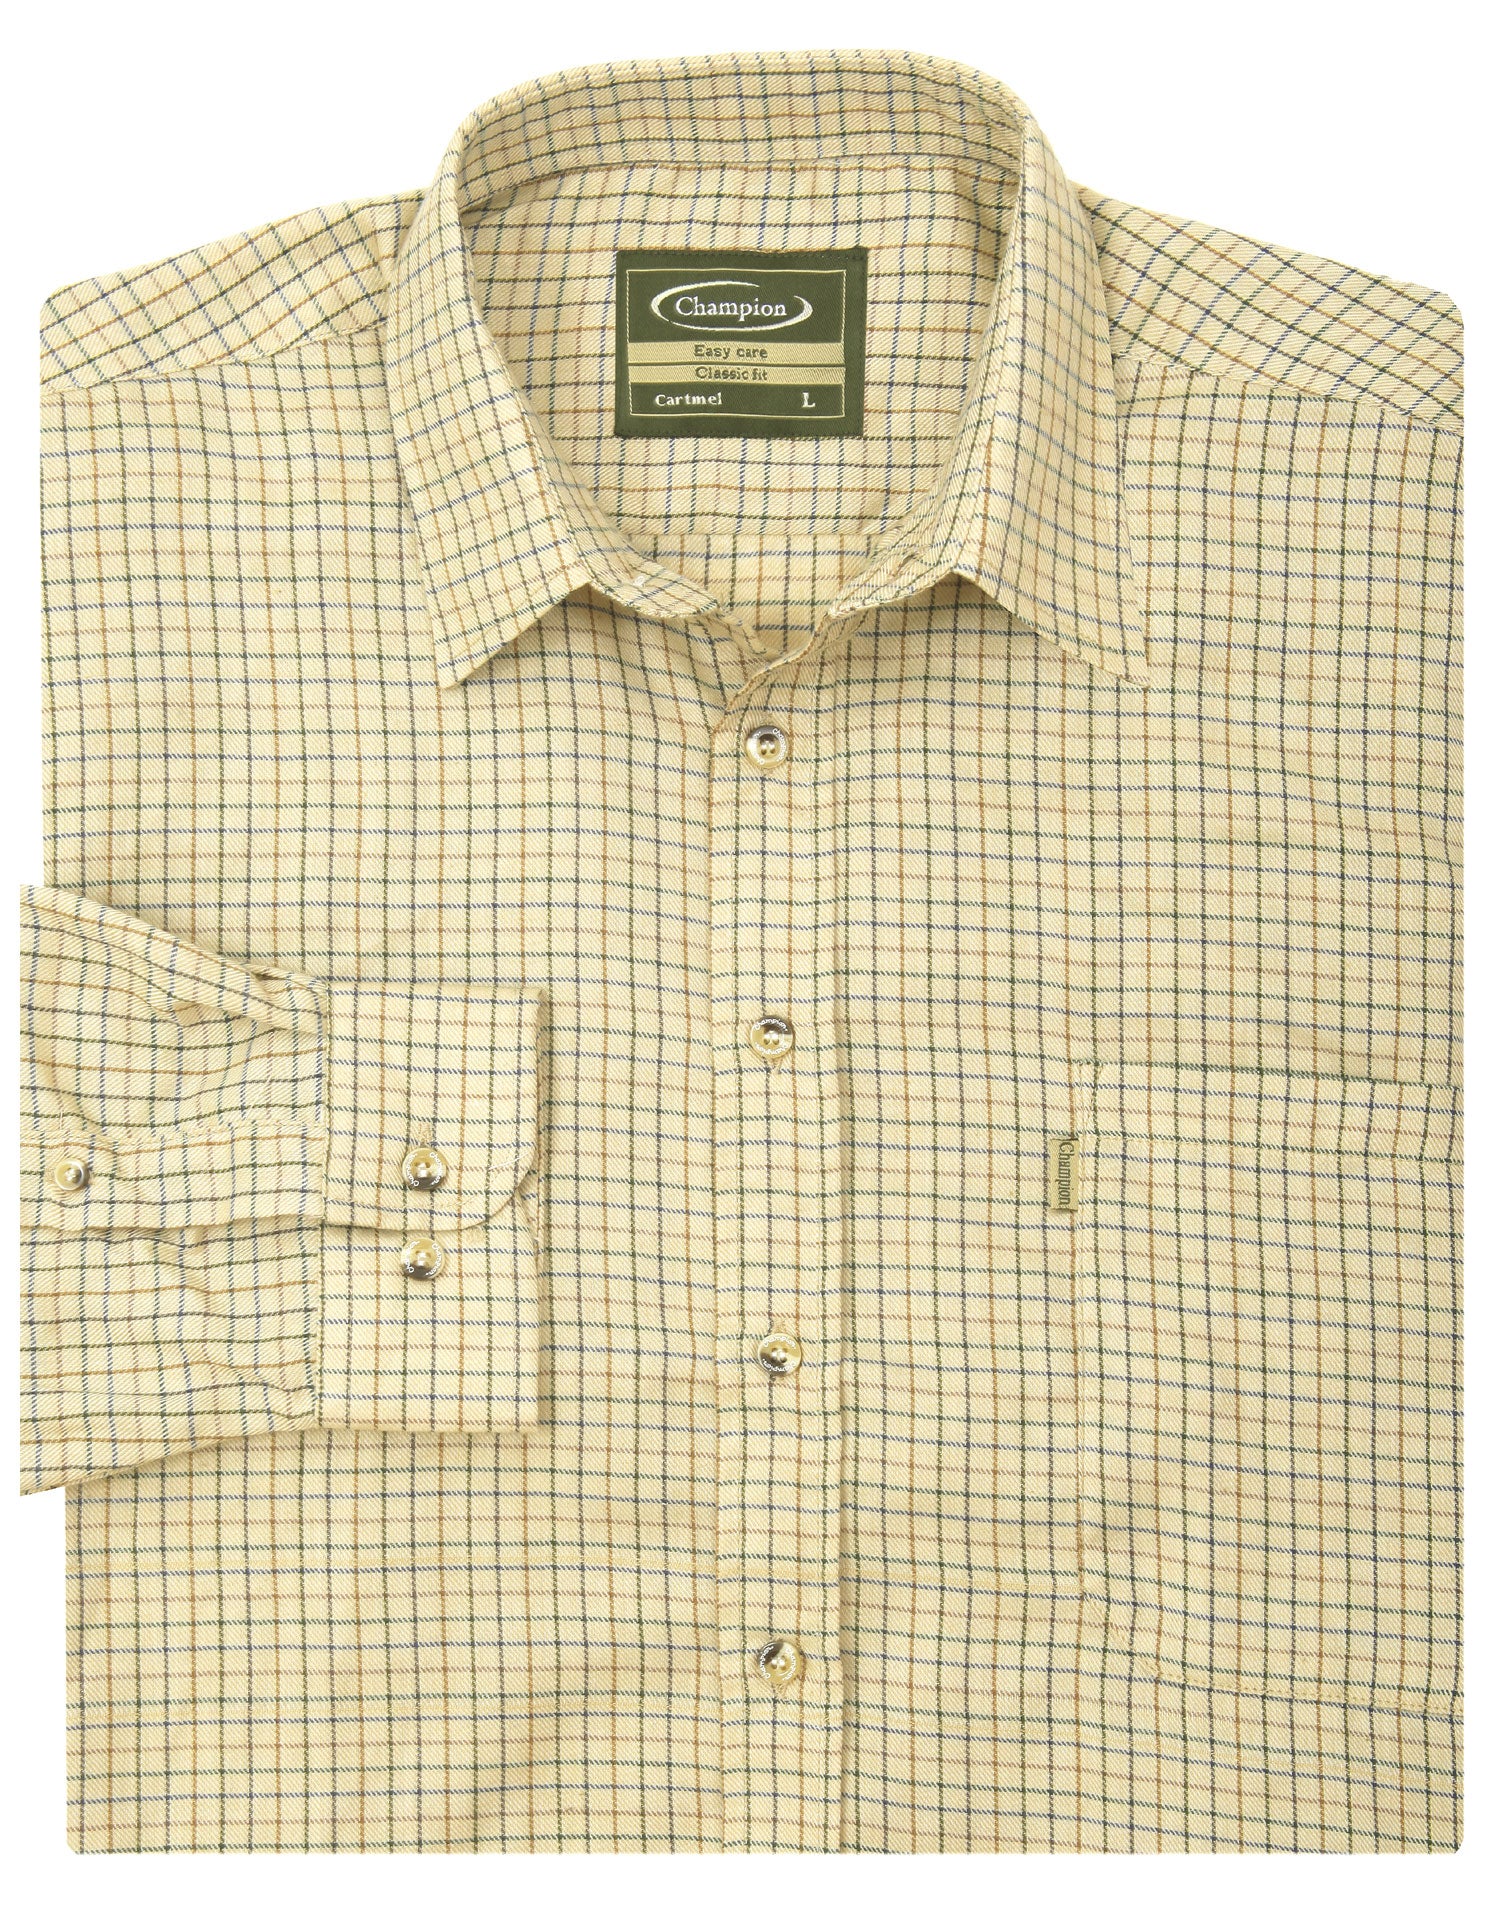 Champion Cartmel Field Tattersall Shirt in two colours stone and olive 